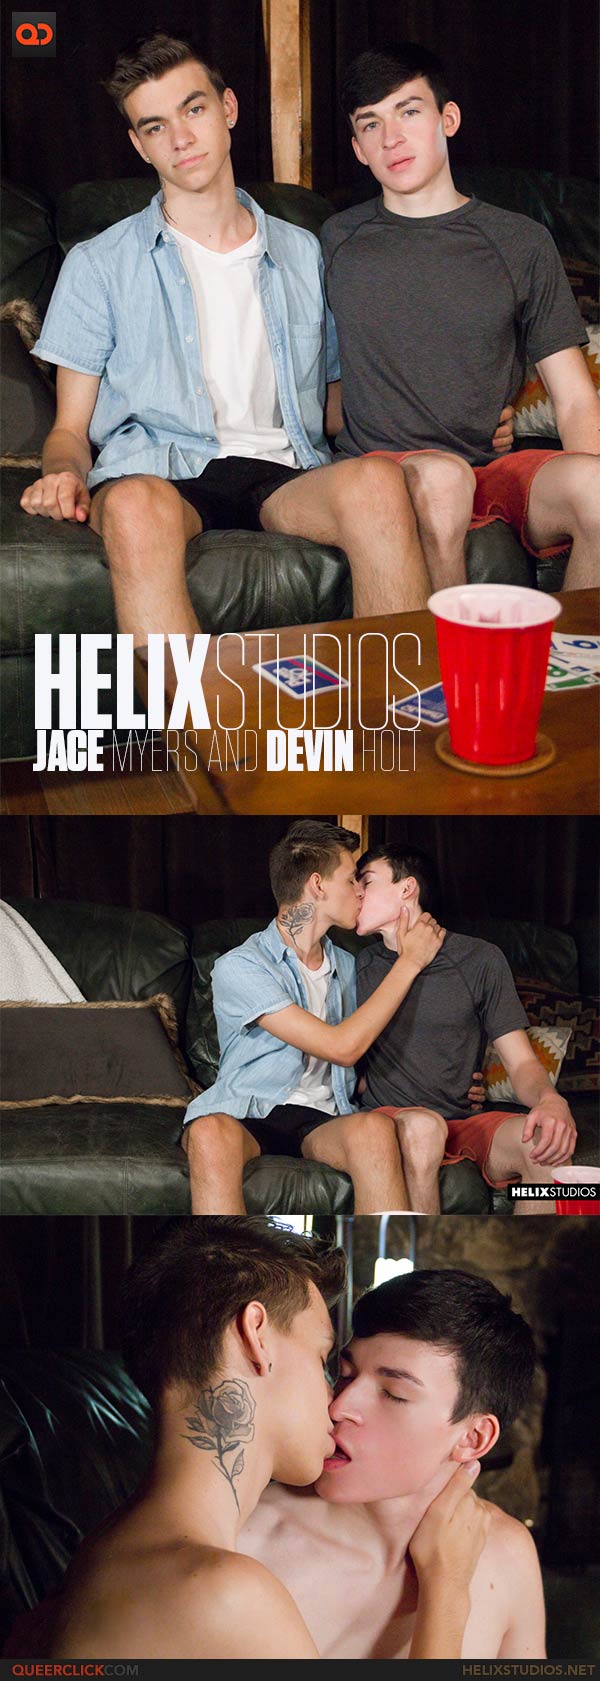 Helix Studios: Jace Myers and Devin Holt